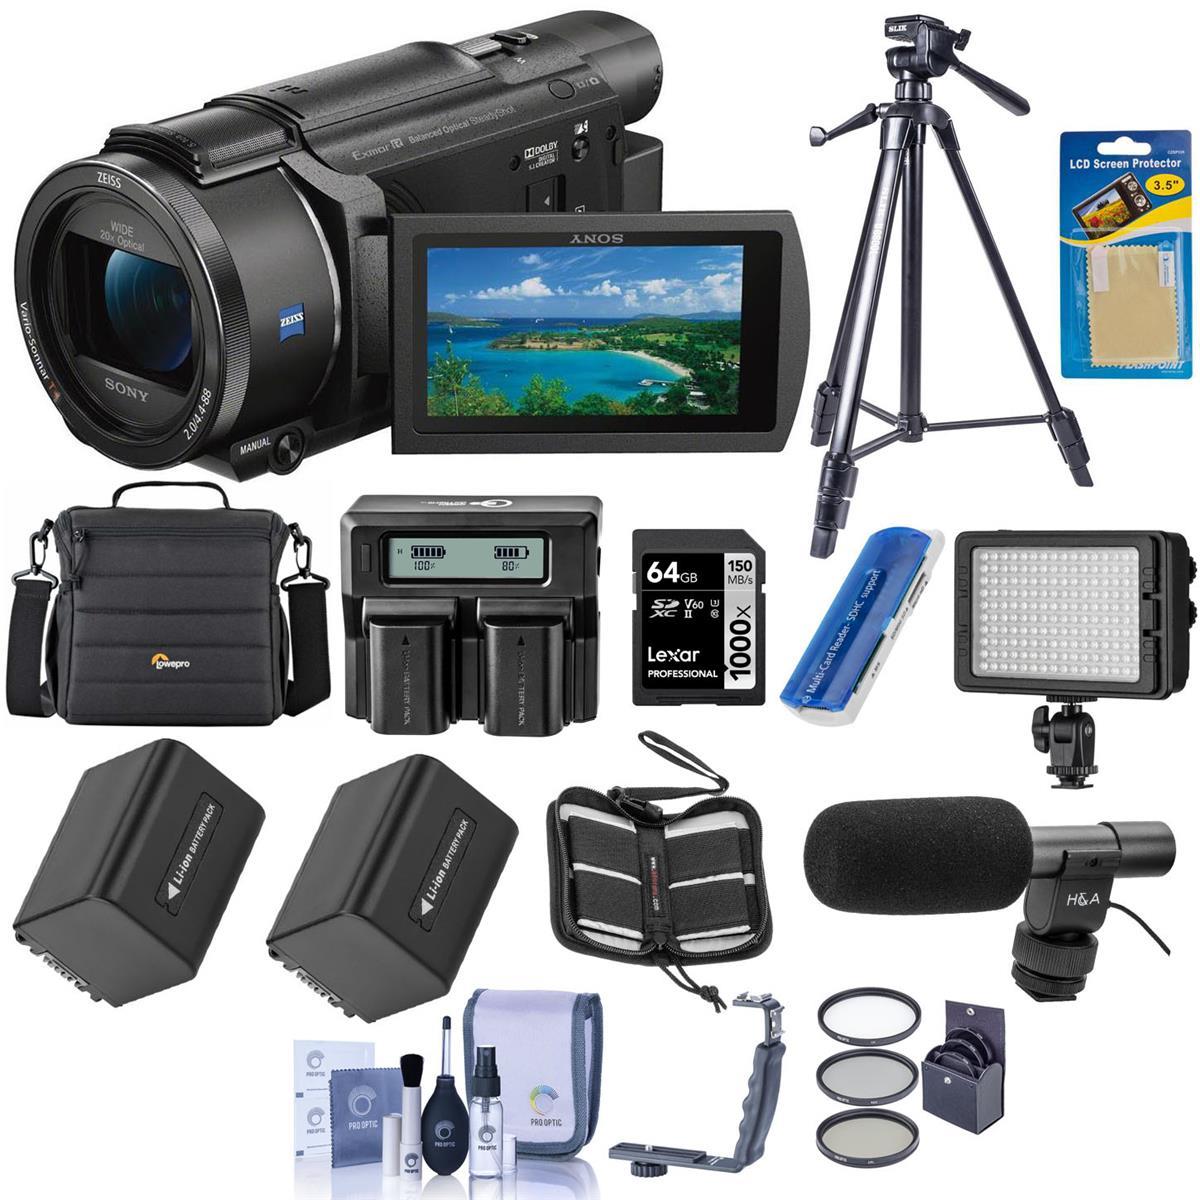 Sony FDR-AX53 4K Ultra HD Handycam Camcorder with Pro Accessory Bundle